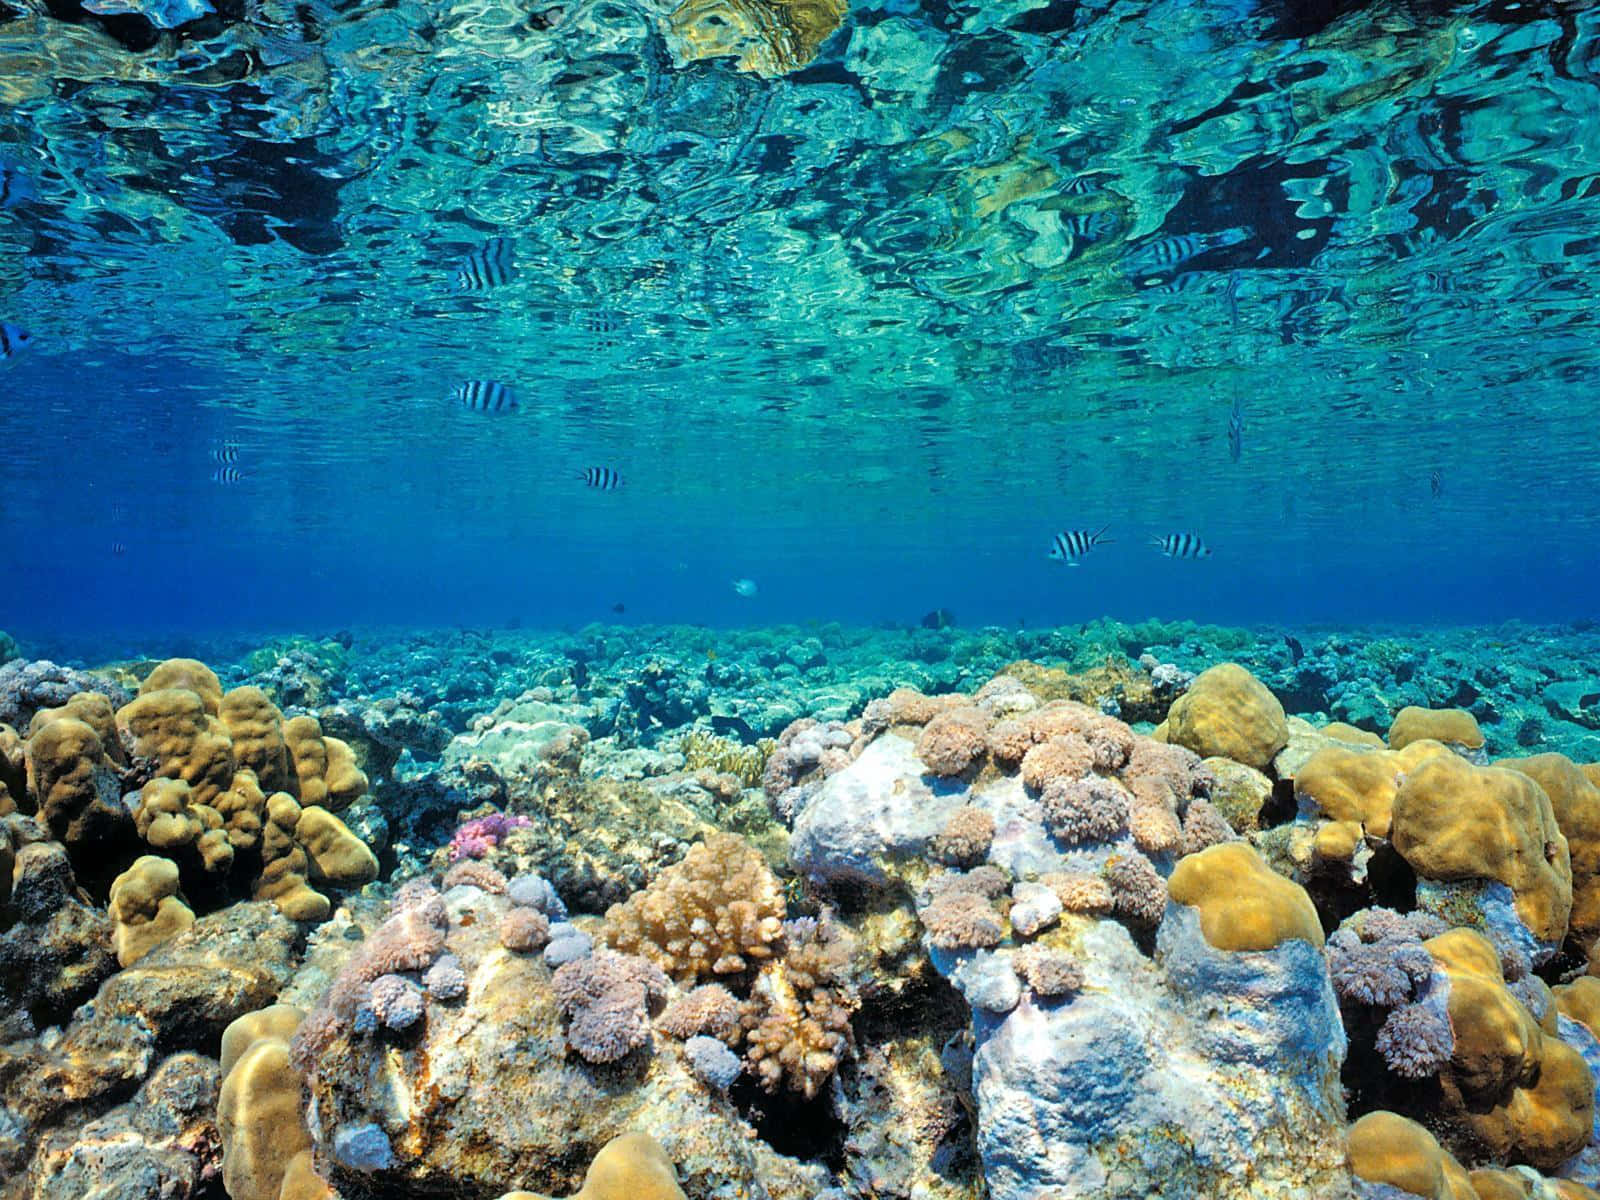 Colorful Corals in the Ocean